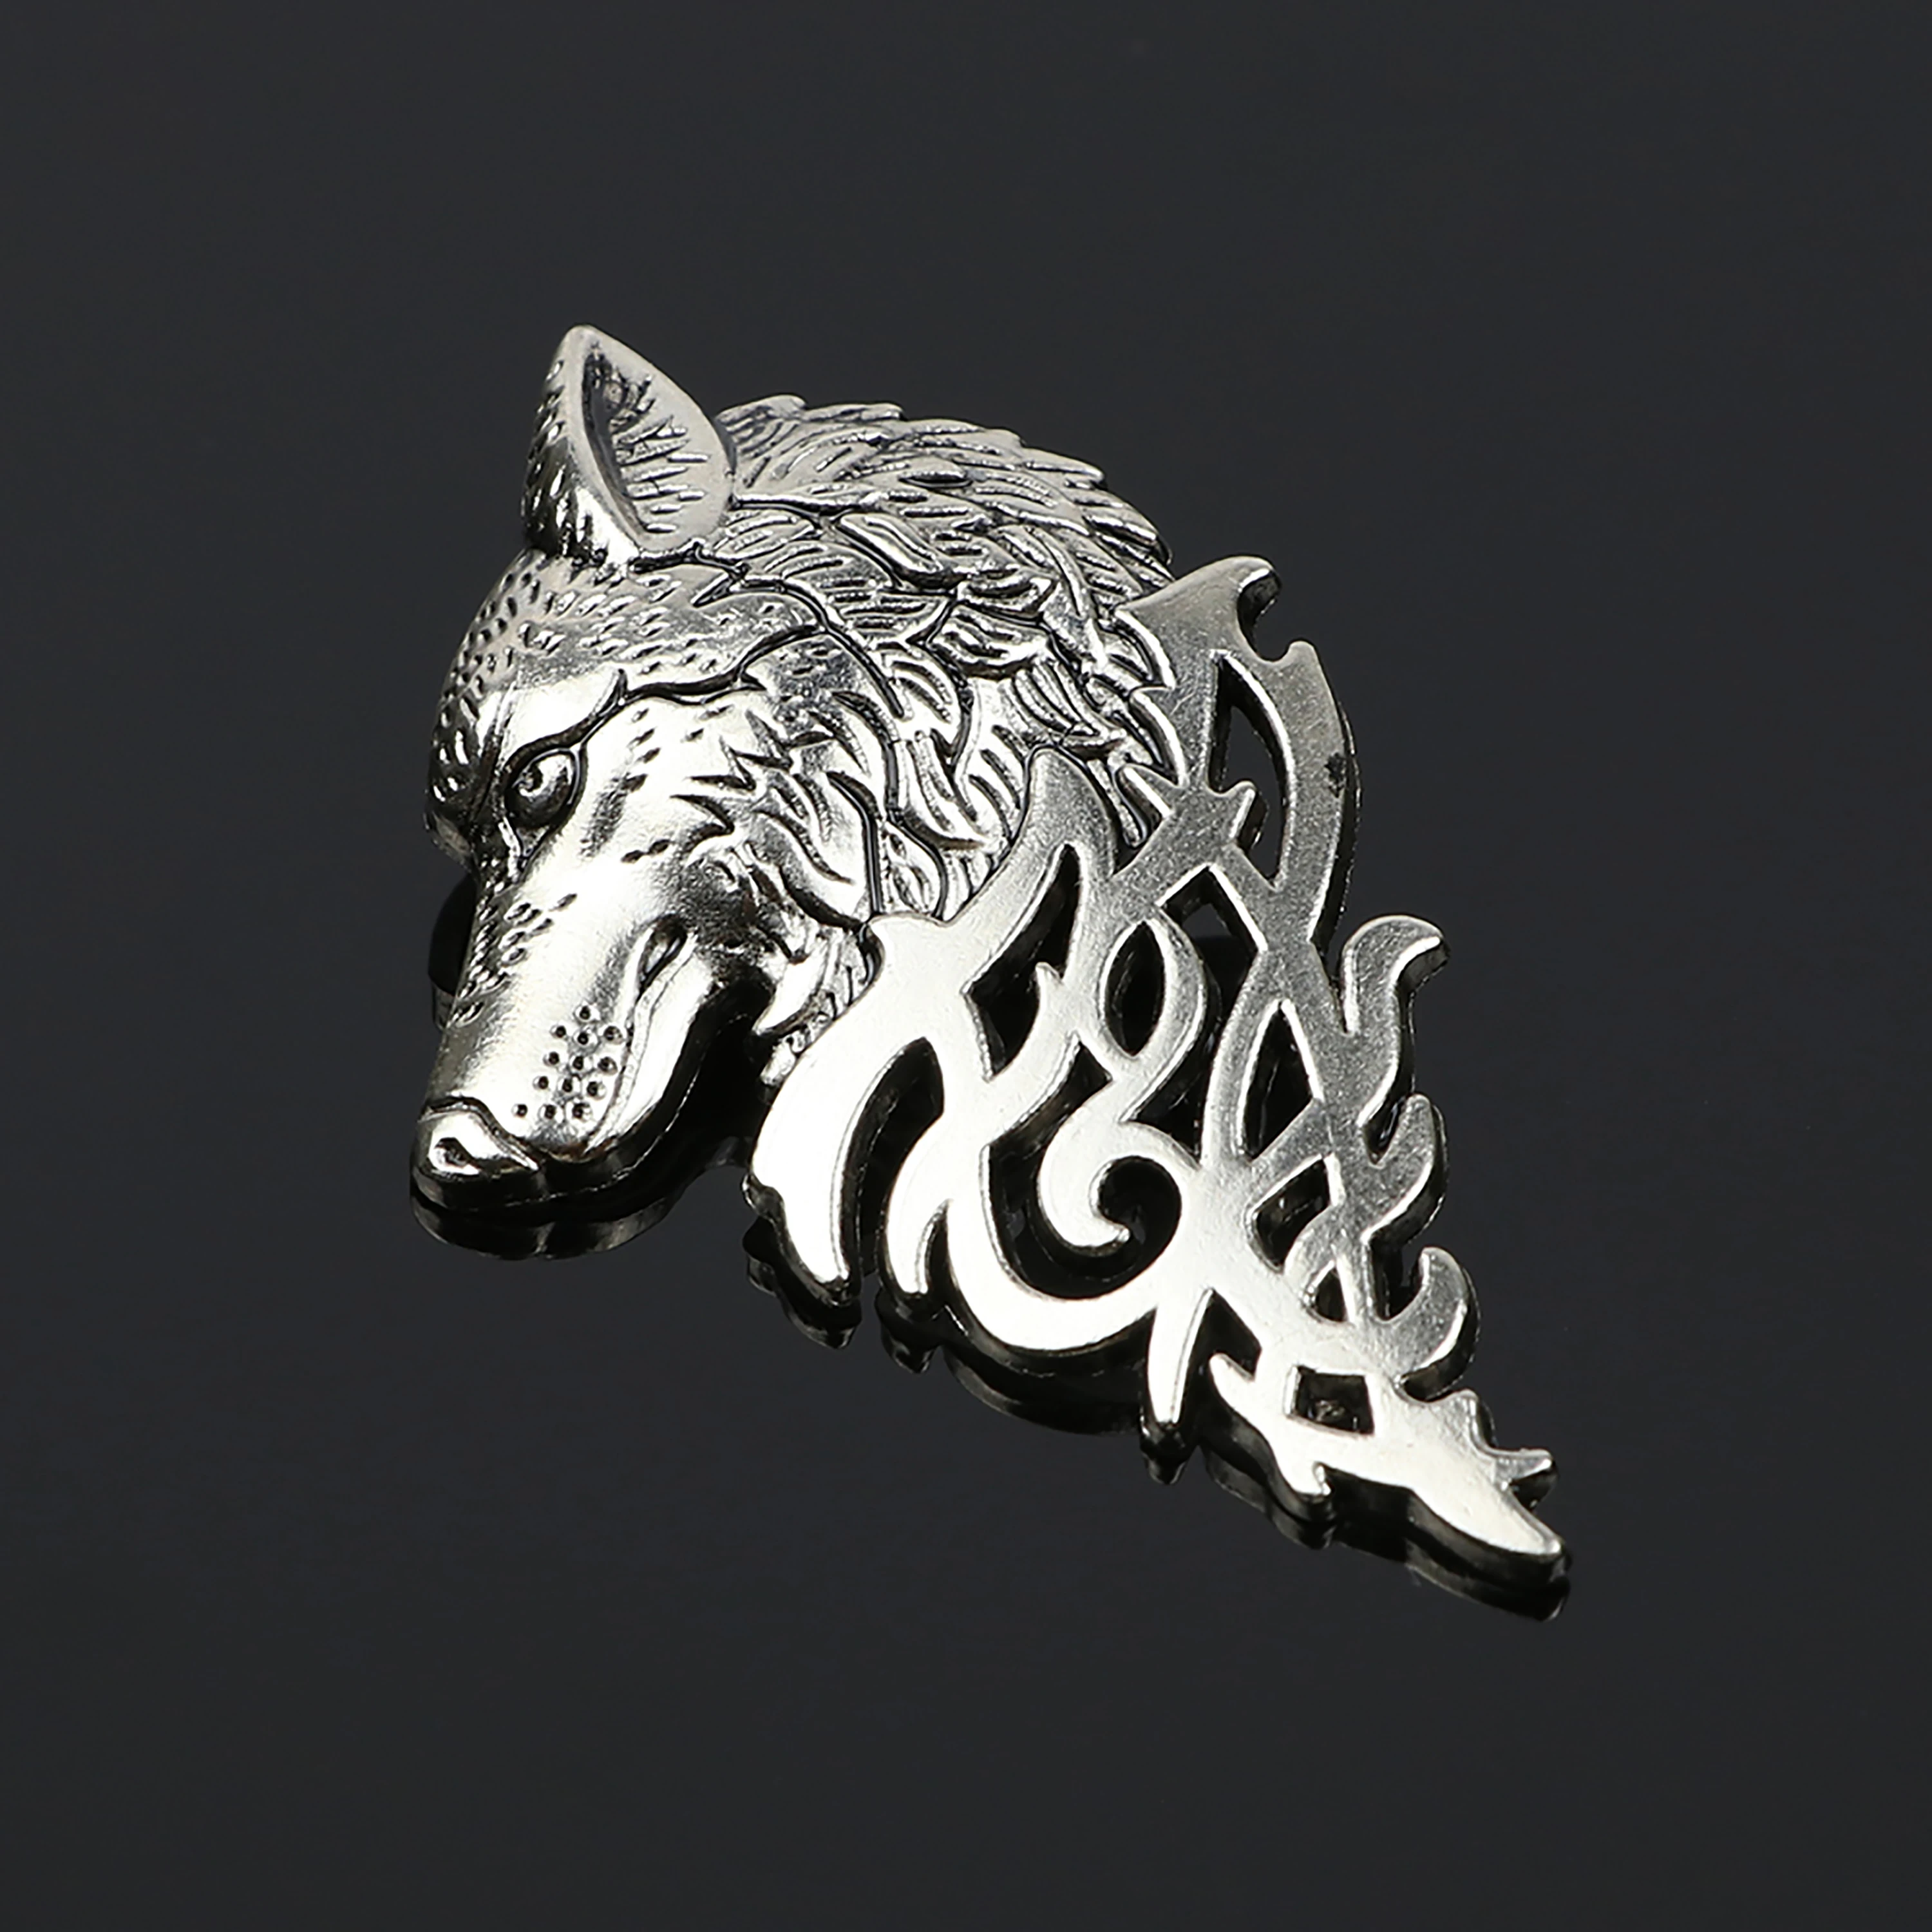 Vintage Gold Silver Brooches For Women Men Lapel Pin Wolf Collar